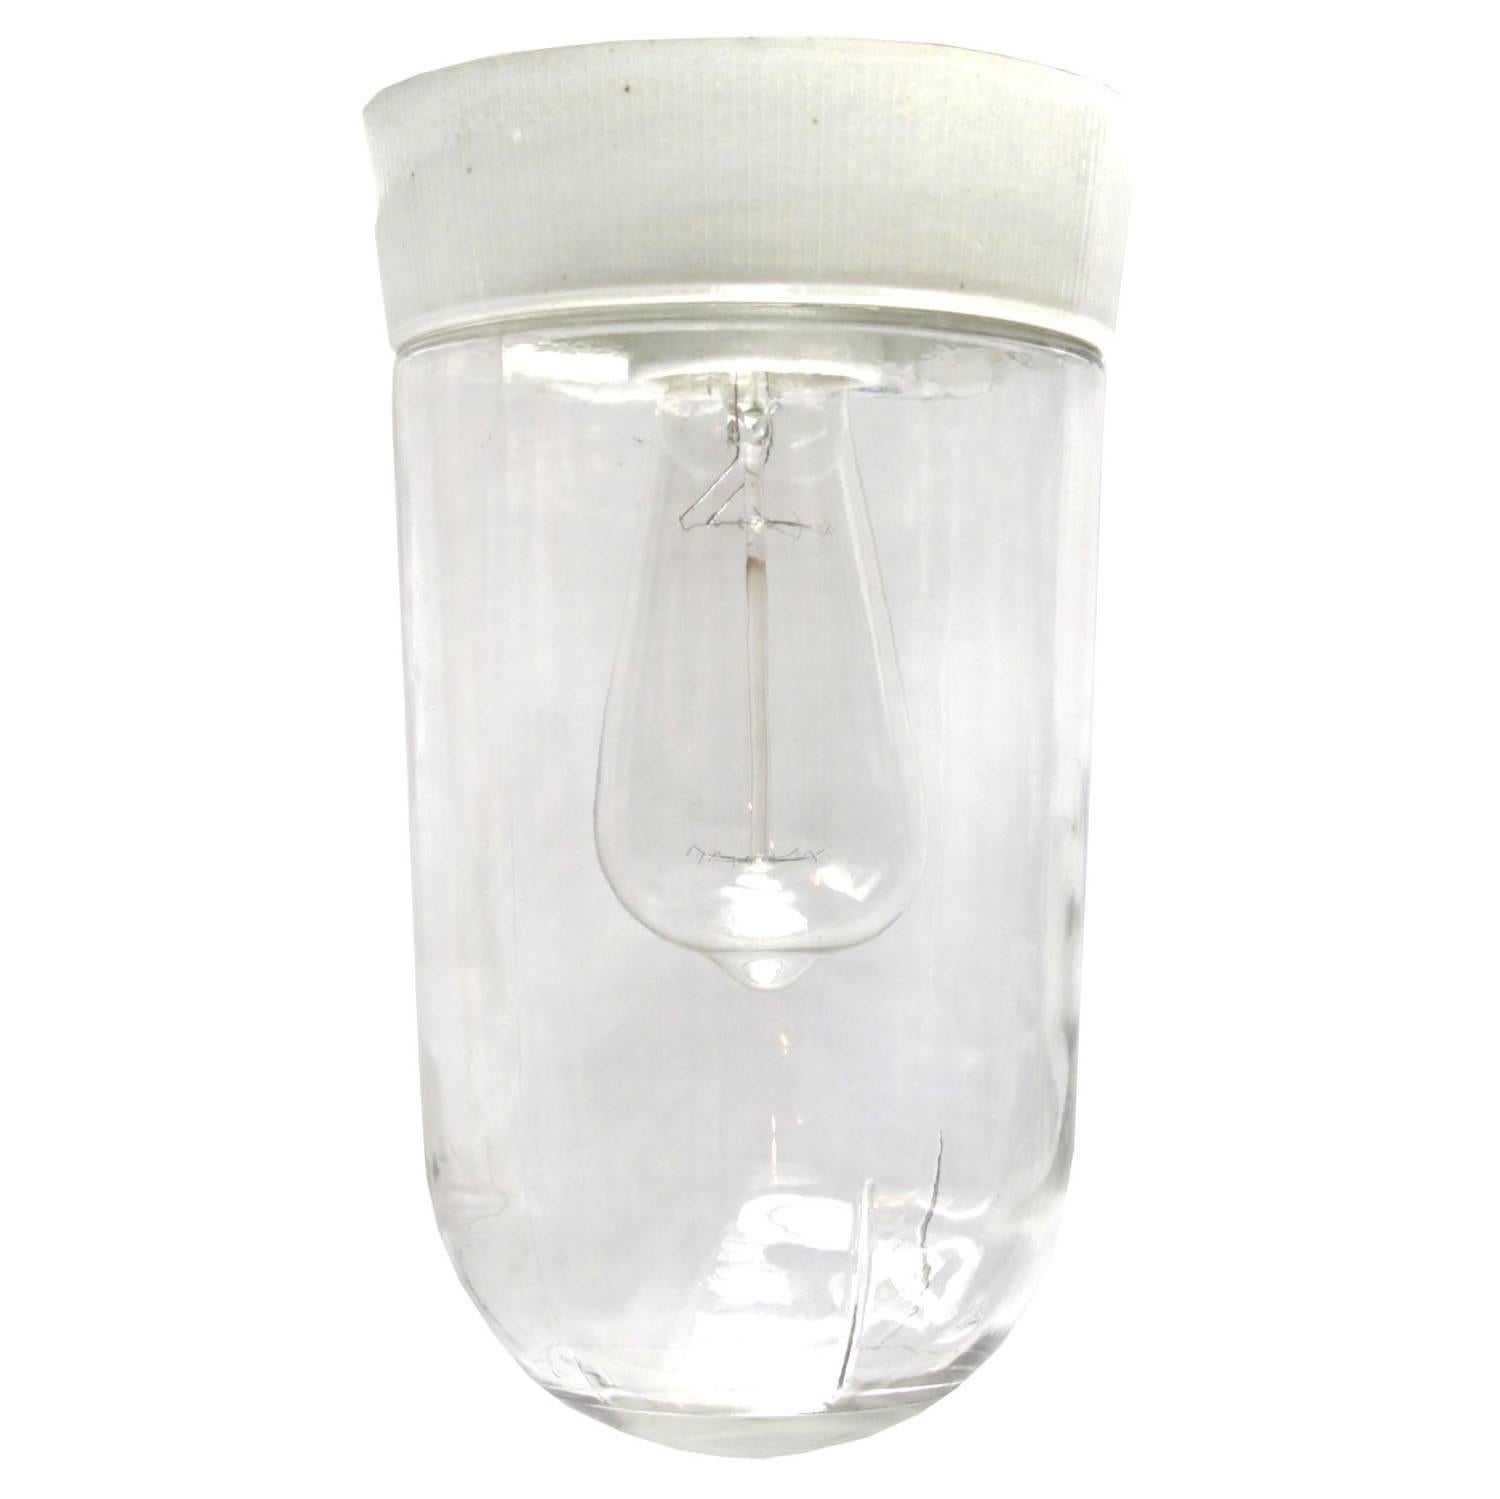 White porcelain. Clear glass.
Two conductors. No ground.

Measure: Weight 1.5 kg / 3.3 lb

Priced per individual item. All lamps have been made suitable by international standards for incandescent light bulbs, energy-efficient and LED bulbs. E26/E27